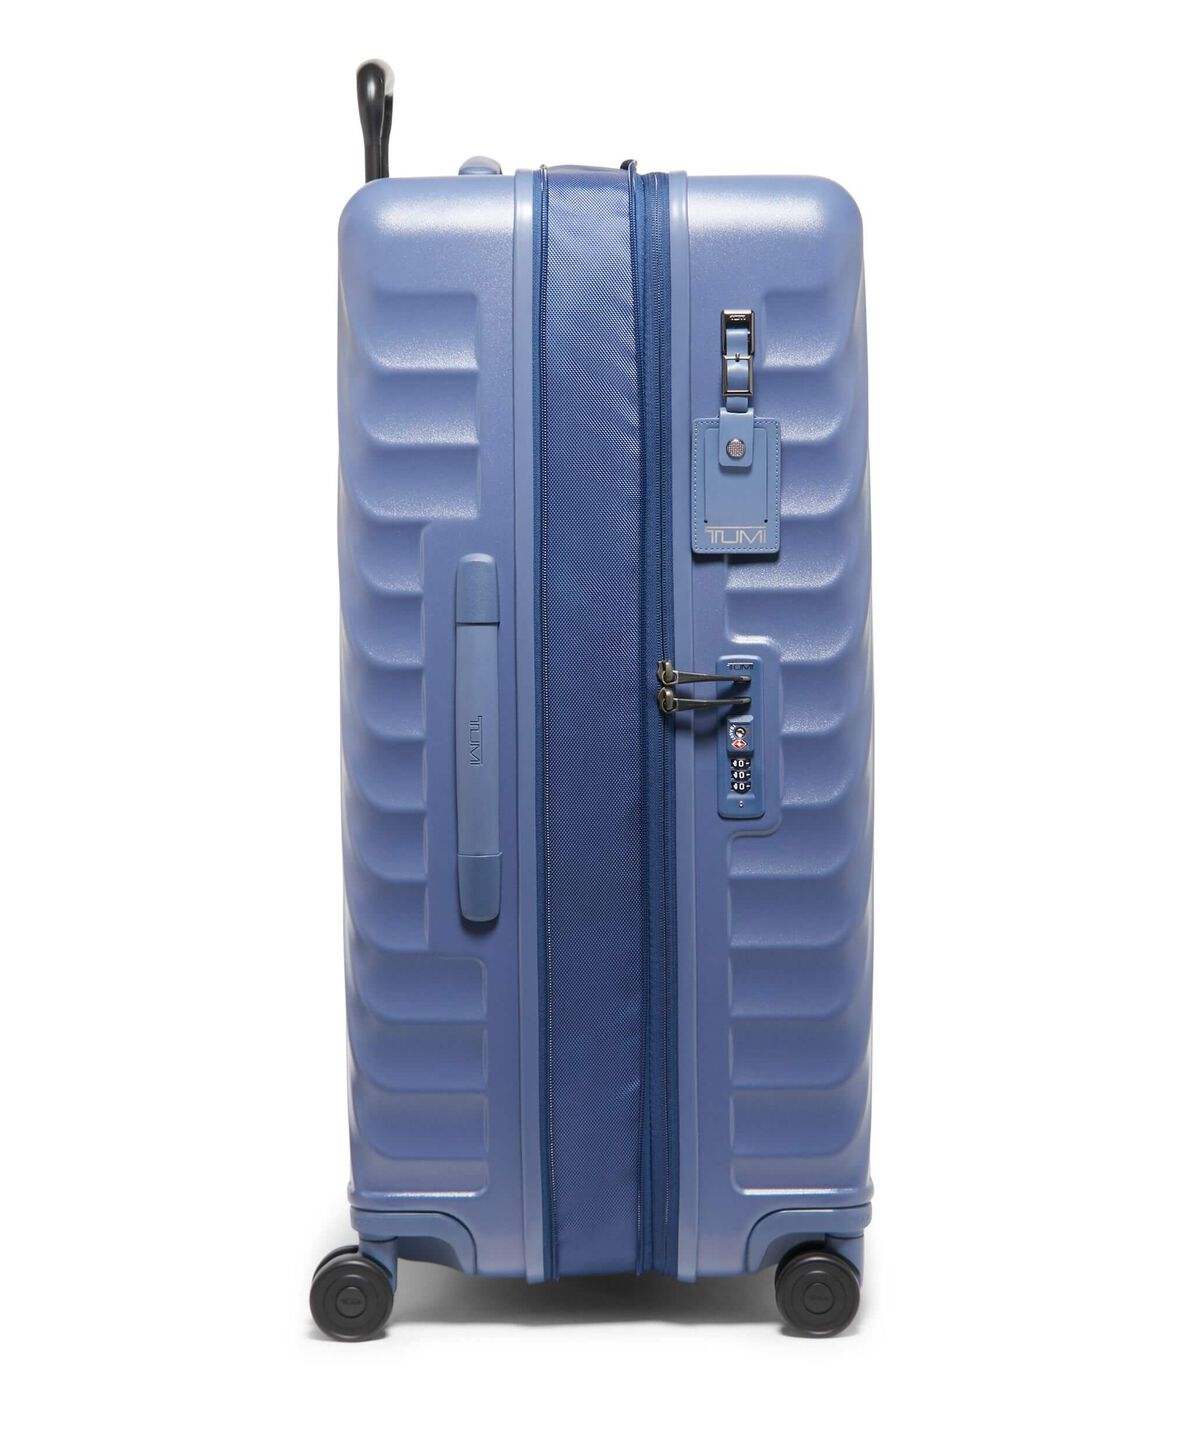 TUMI T-Tech Network Lightweight Luggage Collection